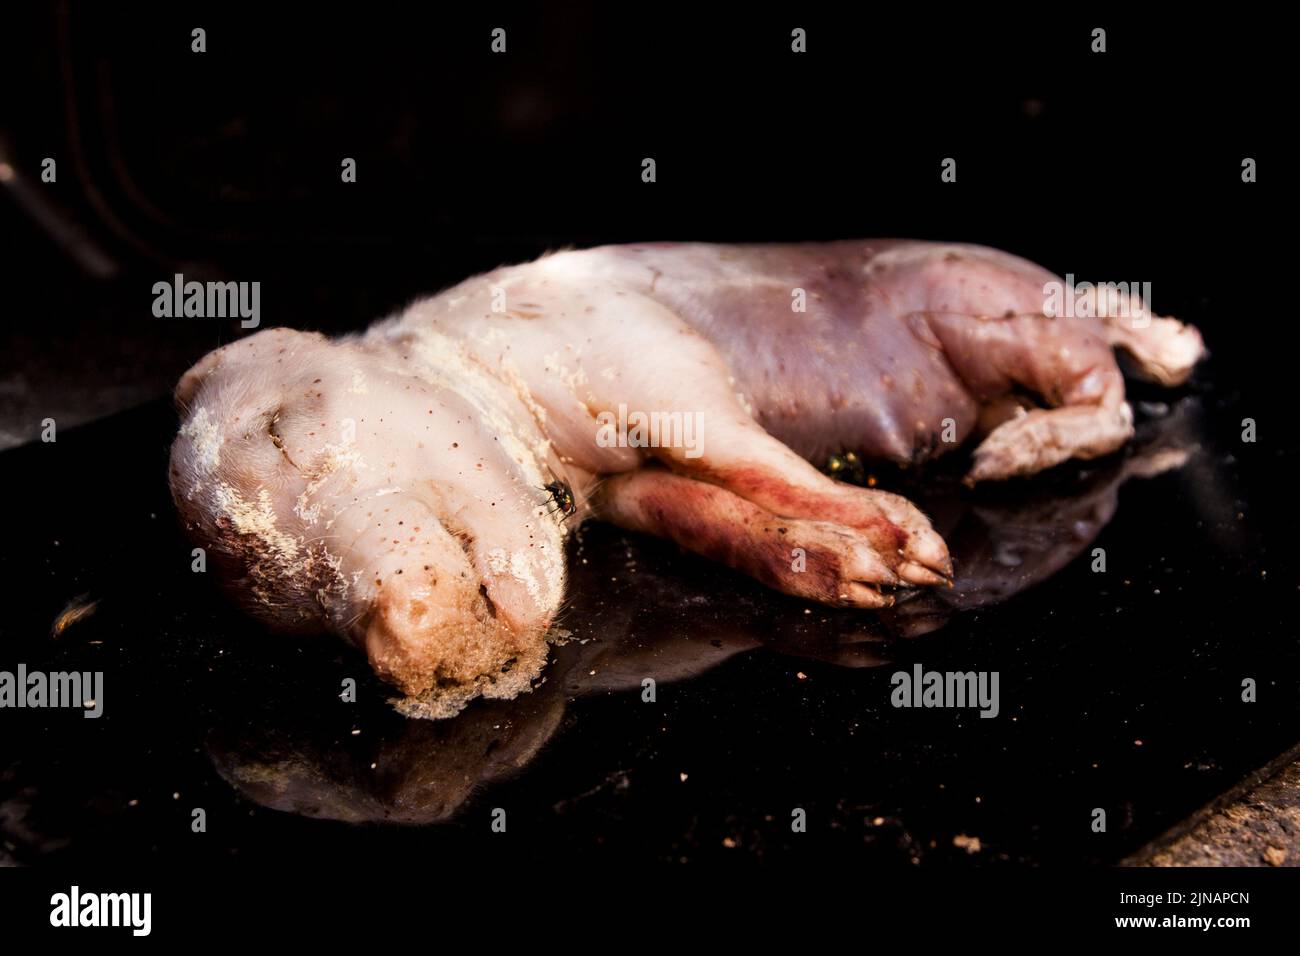 Decomposition stage 1 fresh pig corpse with fly eggs Stock Photo